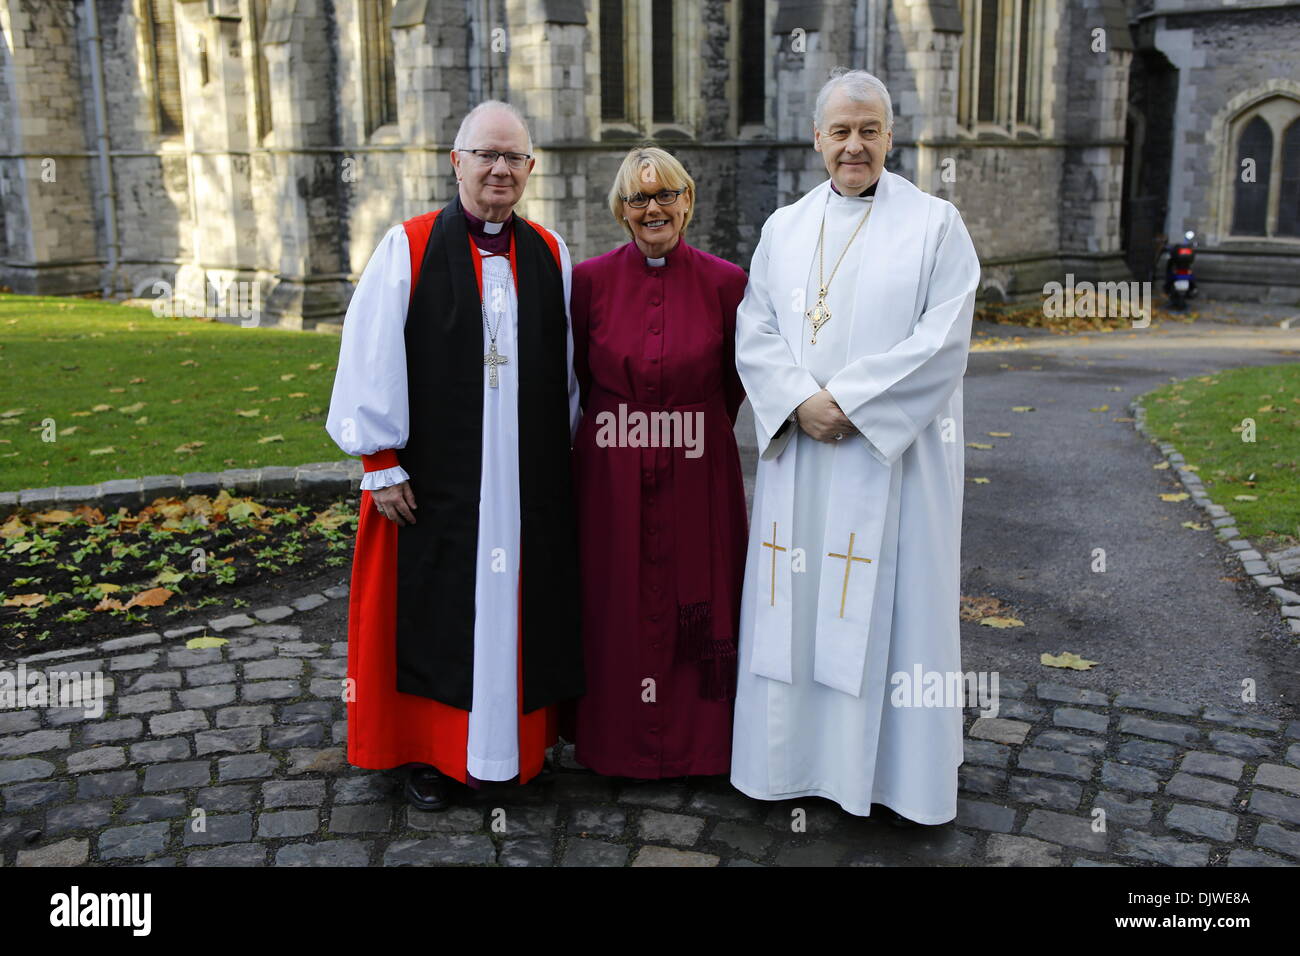 Dublin, Ireland. 30th November 2013. The bishop-elect the Revd Pat Storey (M) is pictured with the Archbishop of Armagh, the Most Revd Richard Clarke (L) and the Archbishop of Dublin, the Most Revd Dr Michael Jackson (R) before the service. The Most Revd Pat Storey has been consecrated as Church of Ireland Bishop of Meath and Kildare in Dublin's Christ Church Cathedral. Credit:  Michael Debets/Alamy Live News Stock Photo